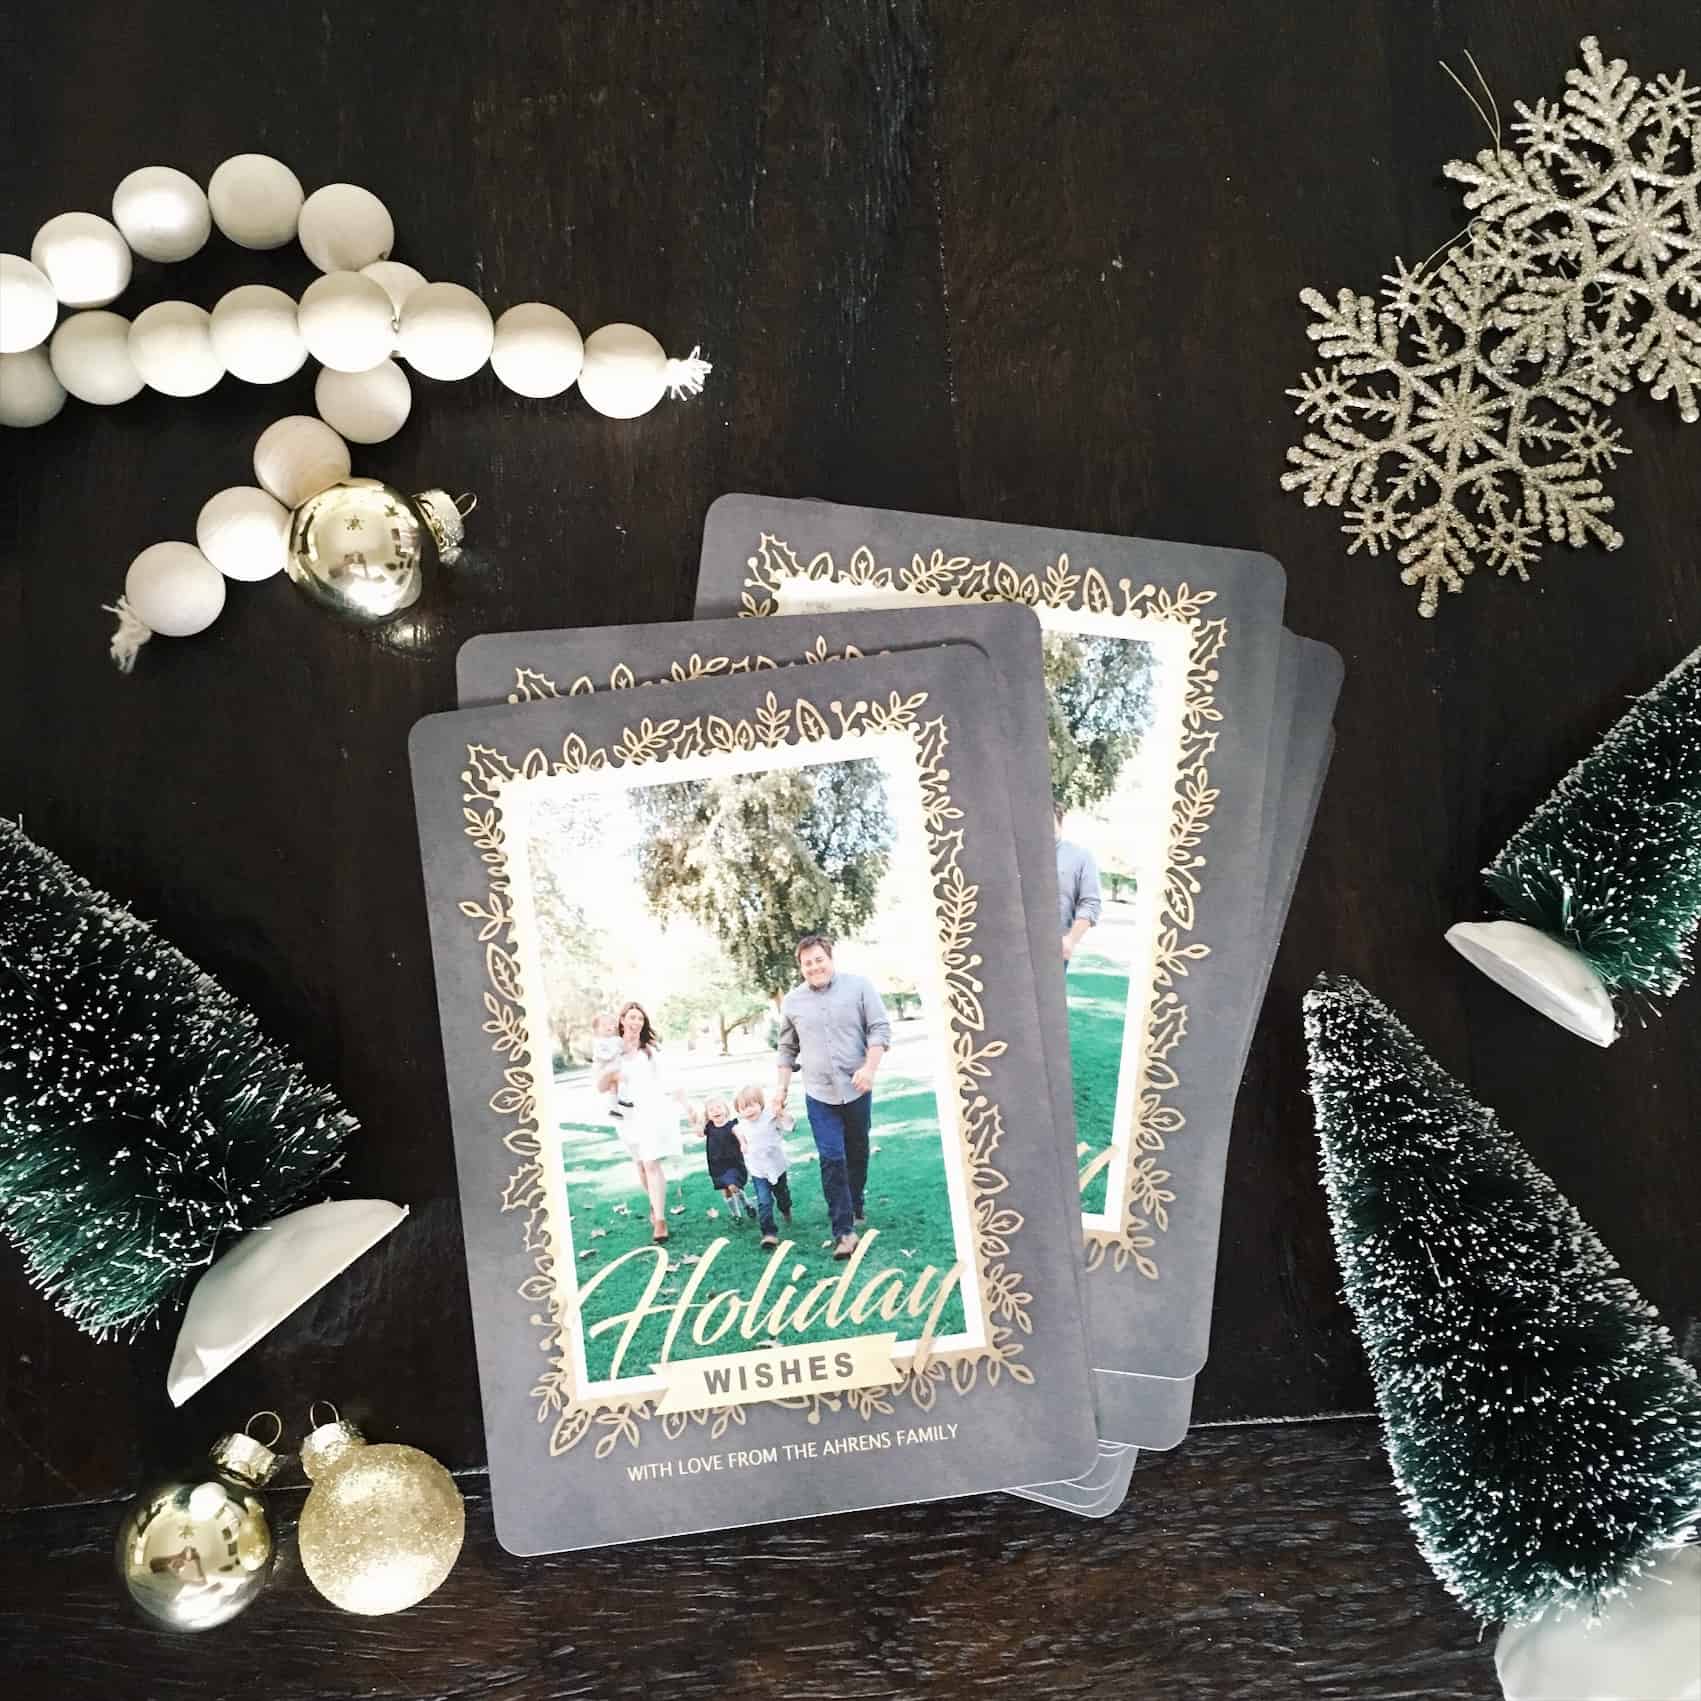 Our 2016 Christmas card and how to create custom Christmas cards for half the price.